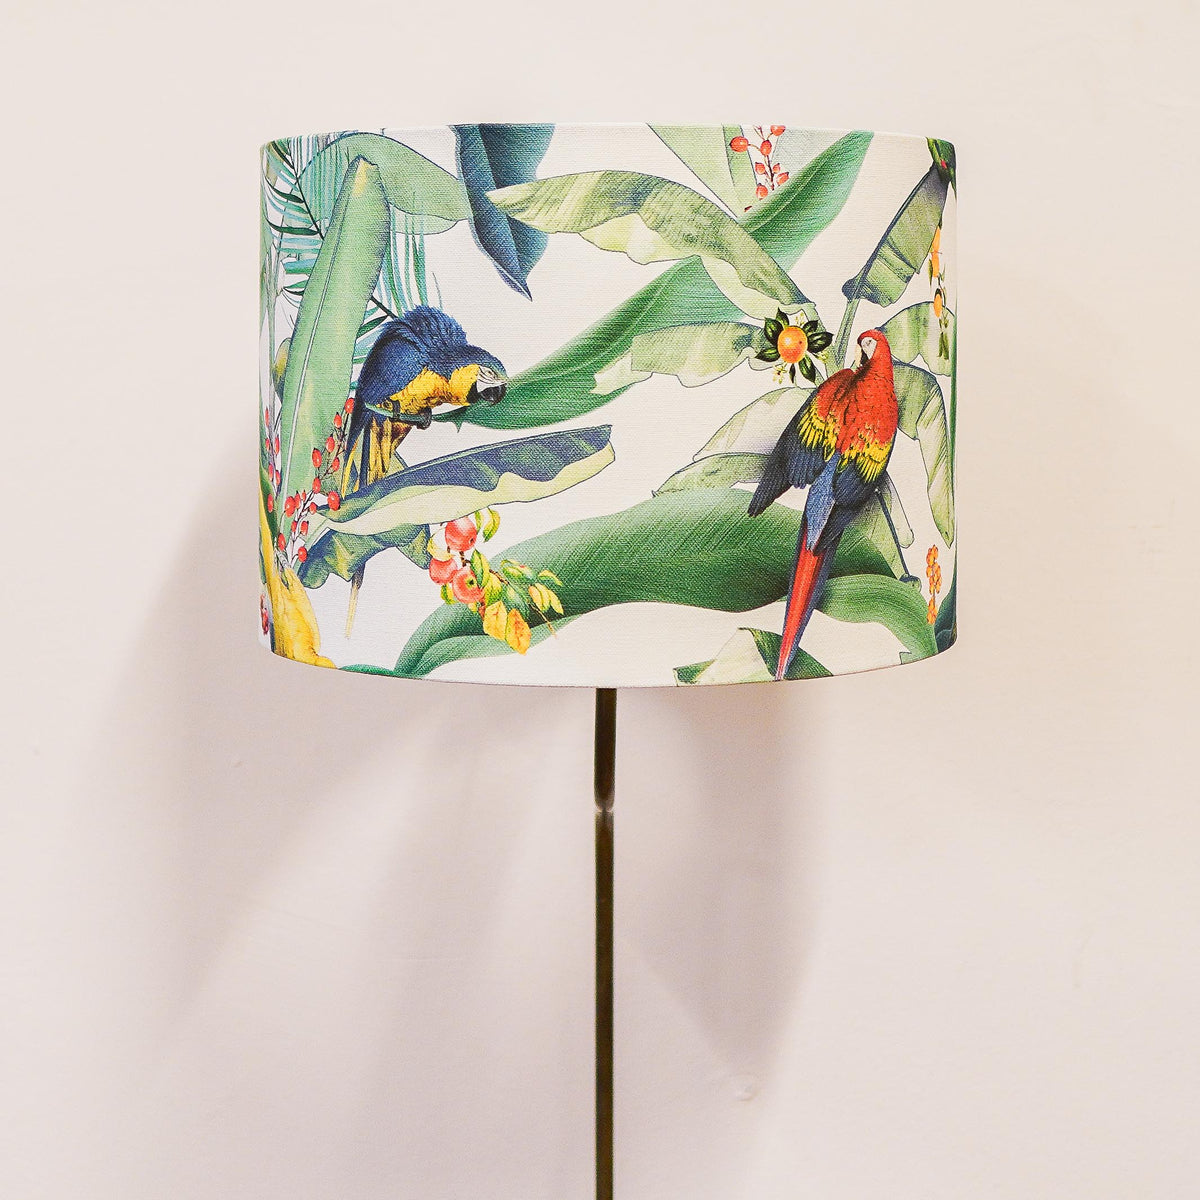 Custom lampshade with parrots and banana leaves in Singapore